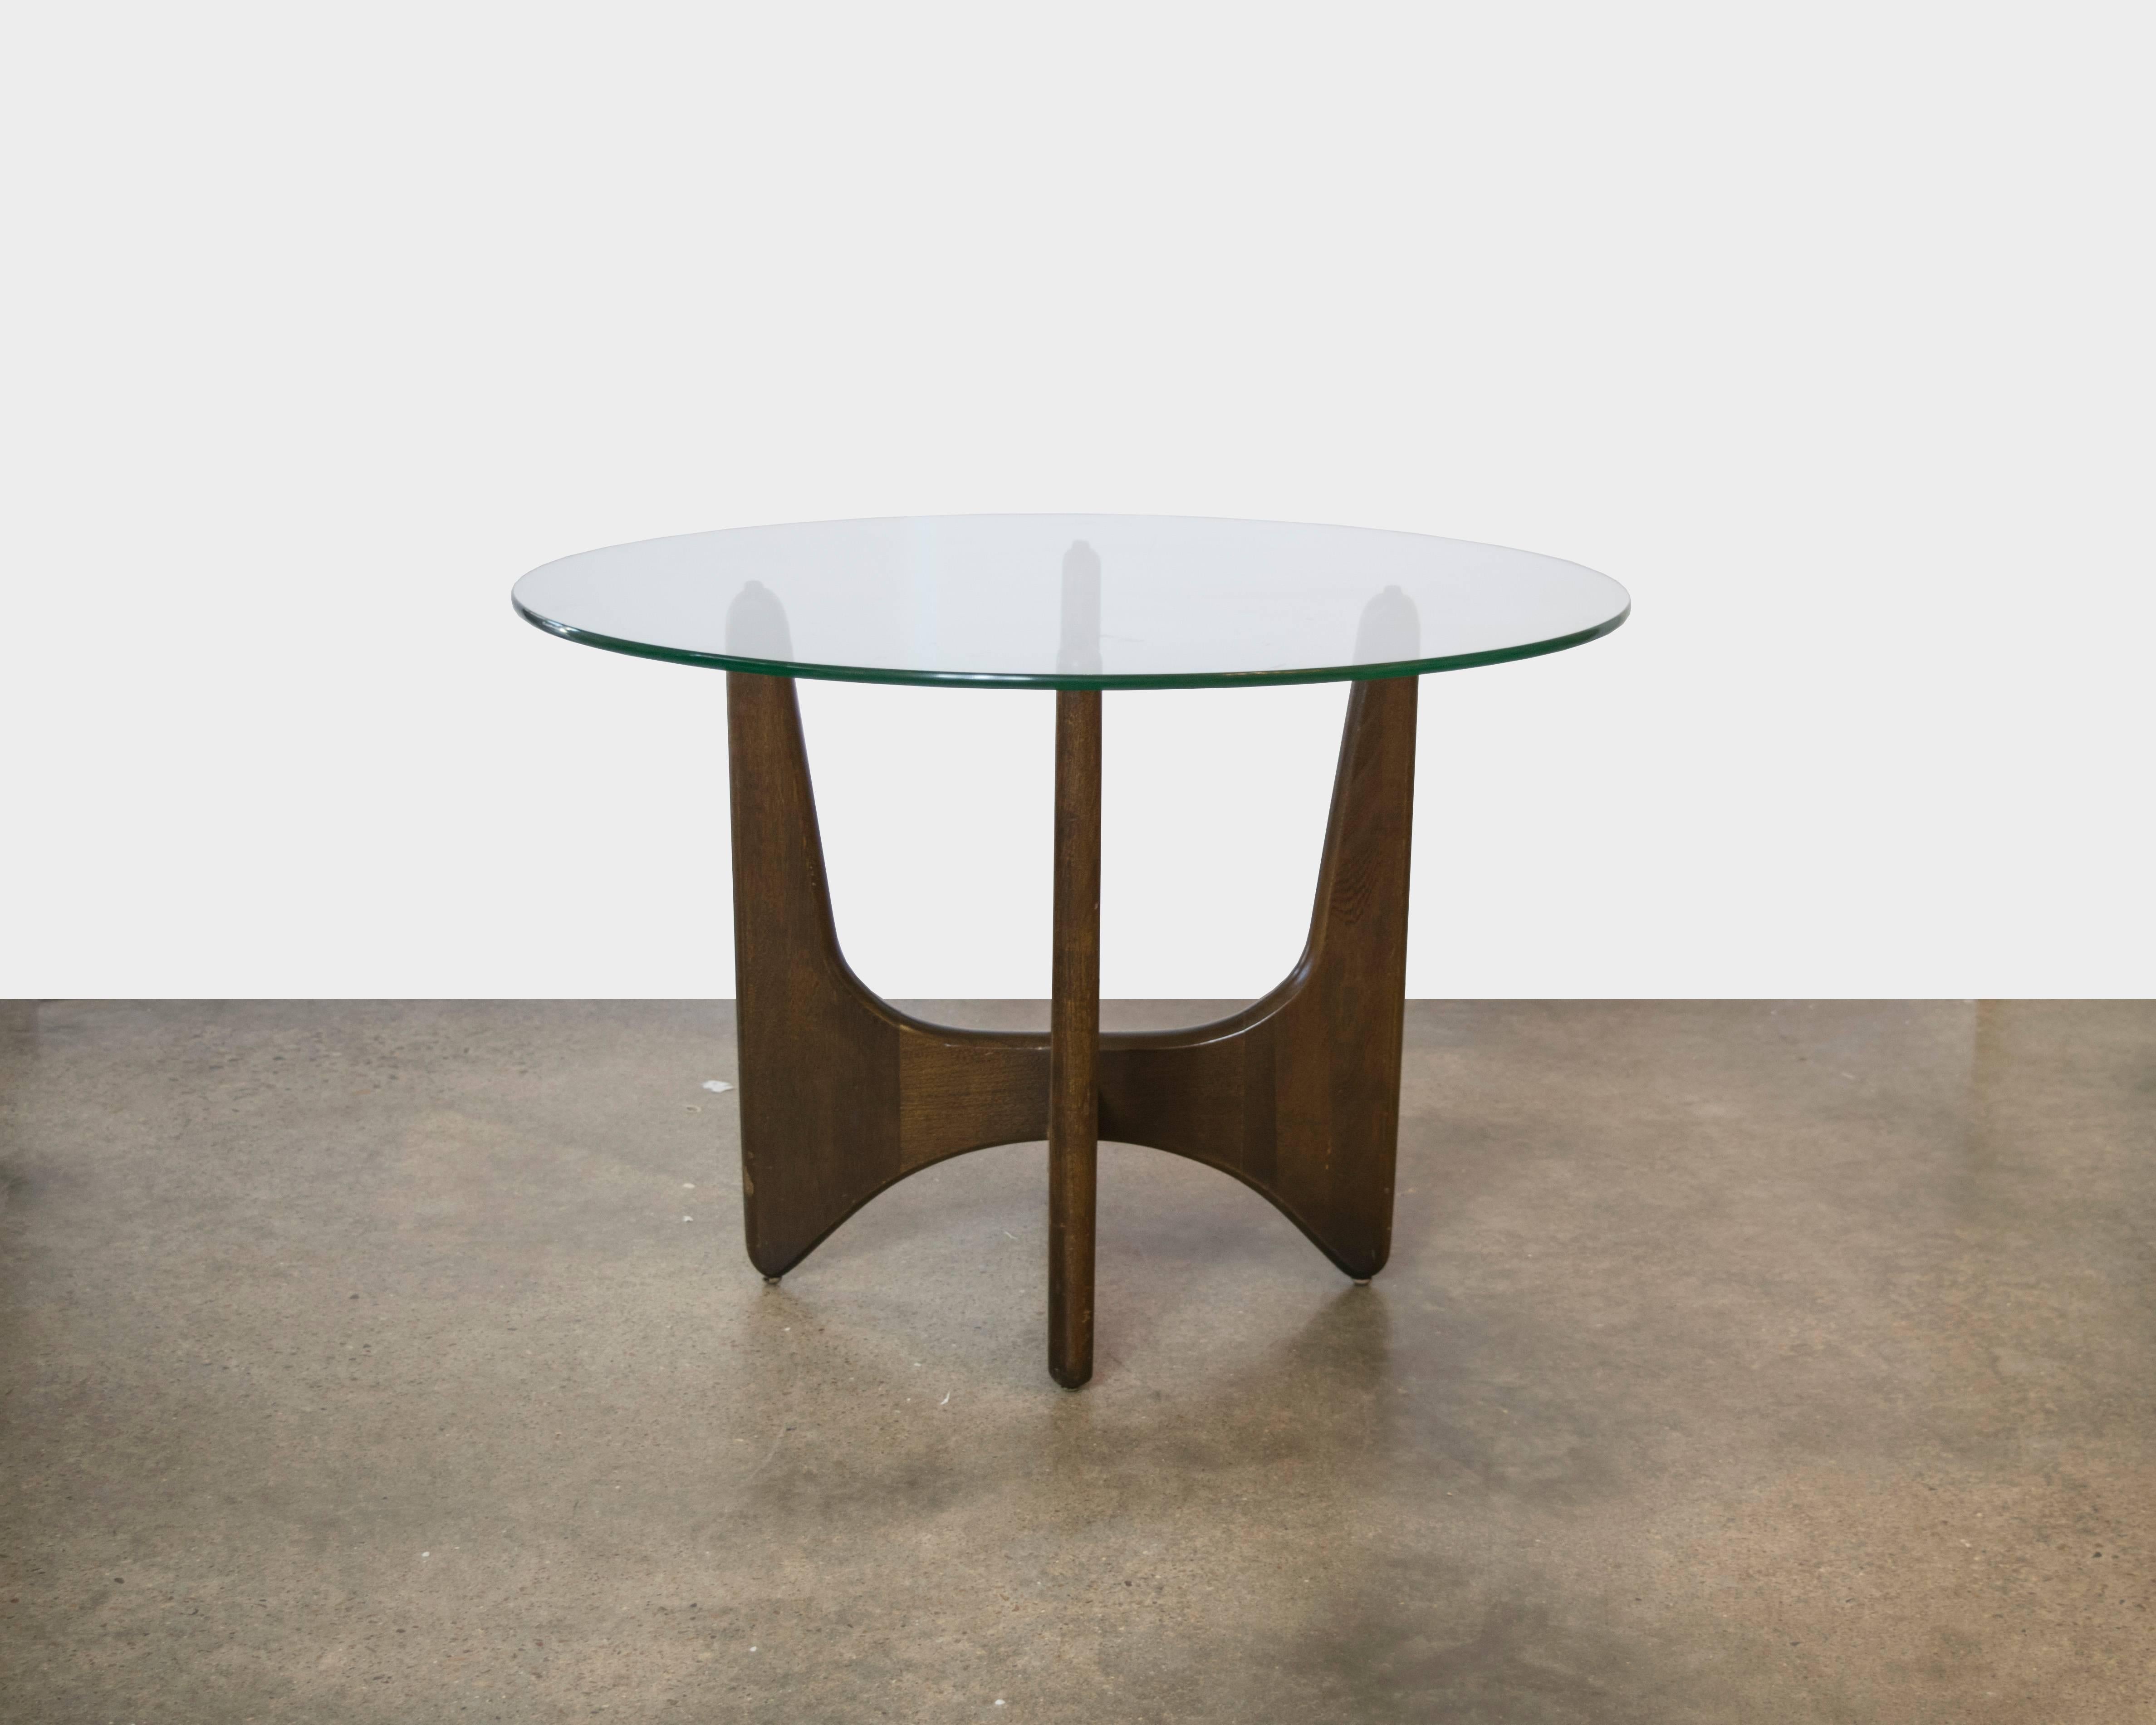 These tables are ironically Adrian Pearsall with the criss crossed x bases and round glass tops.